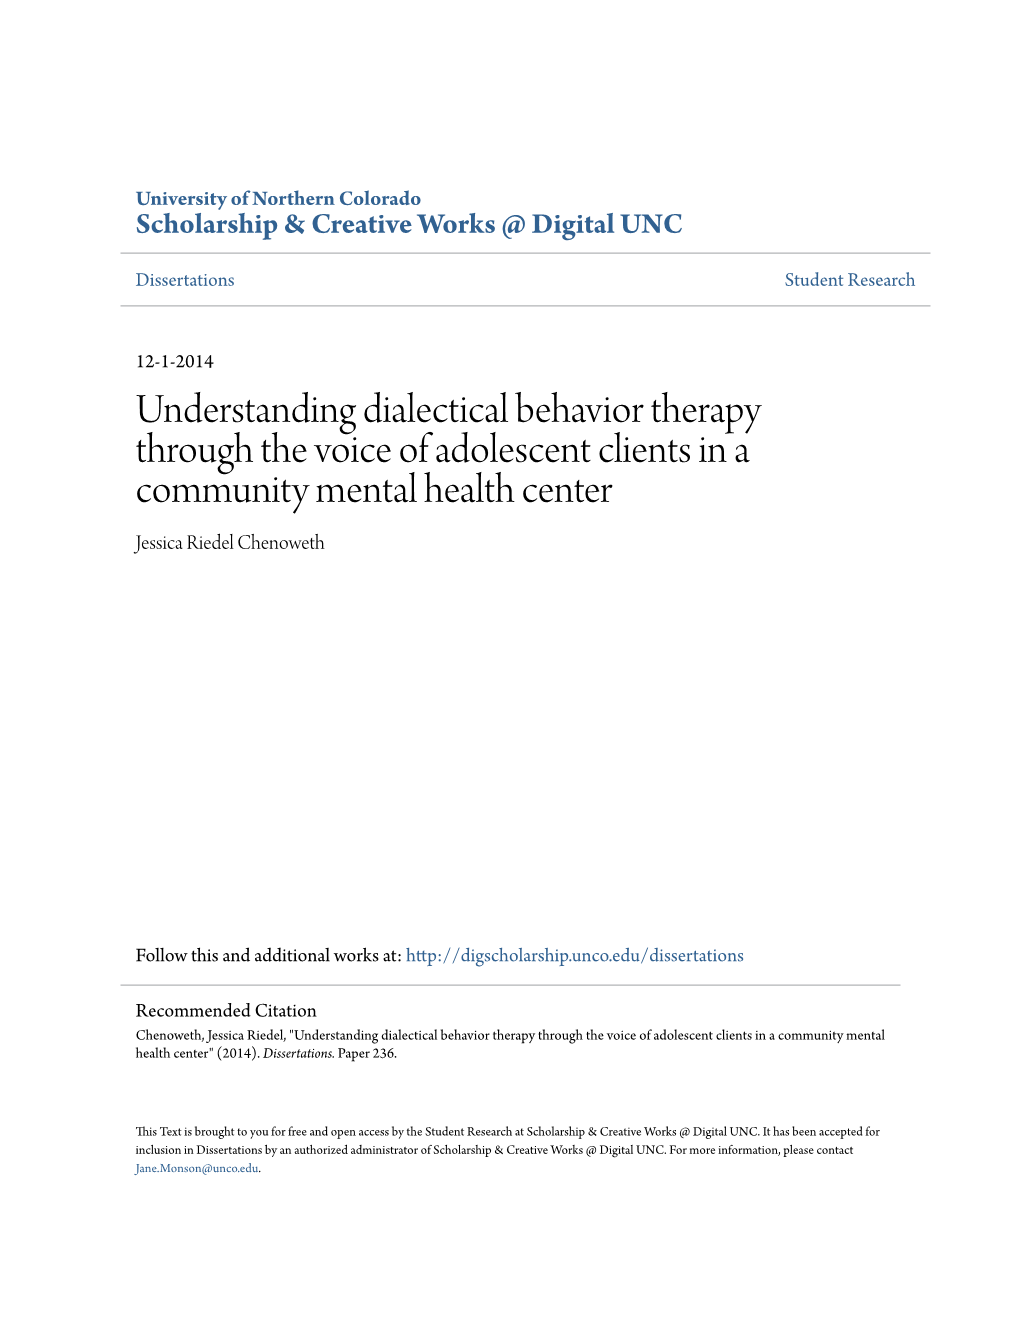 Understanding Dialectical Behavior Therapy Through the Voice of Adolescent Clients in a Community Mental Health Center Jessica Riedel Chenoweth